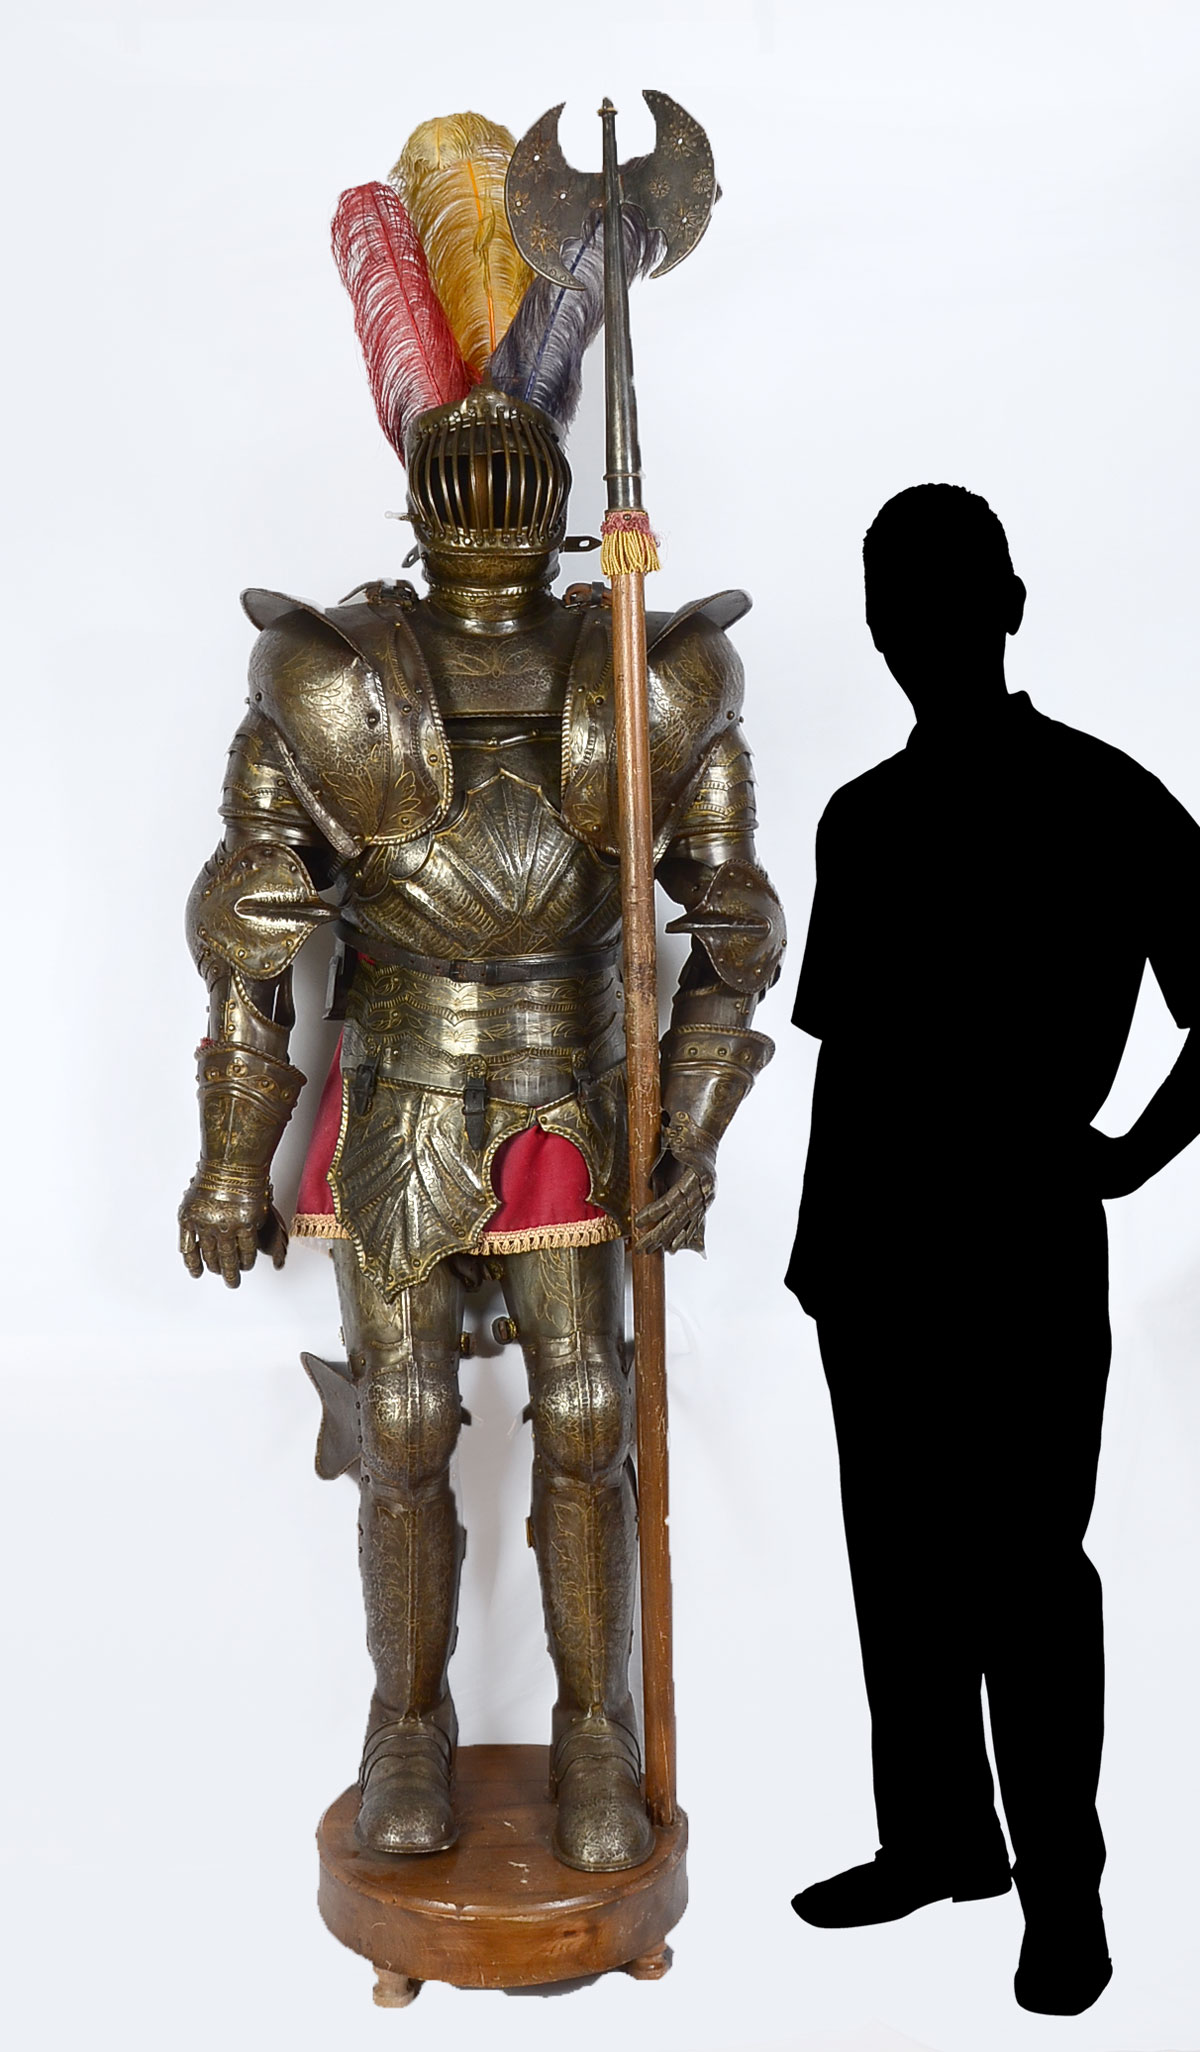 FULL BODY SUIT OF ARMOR: Engraved